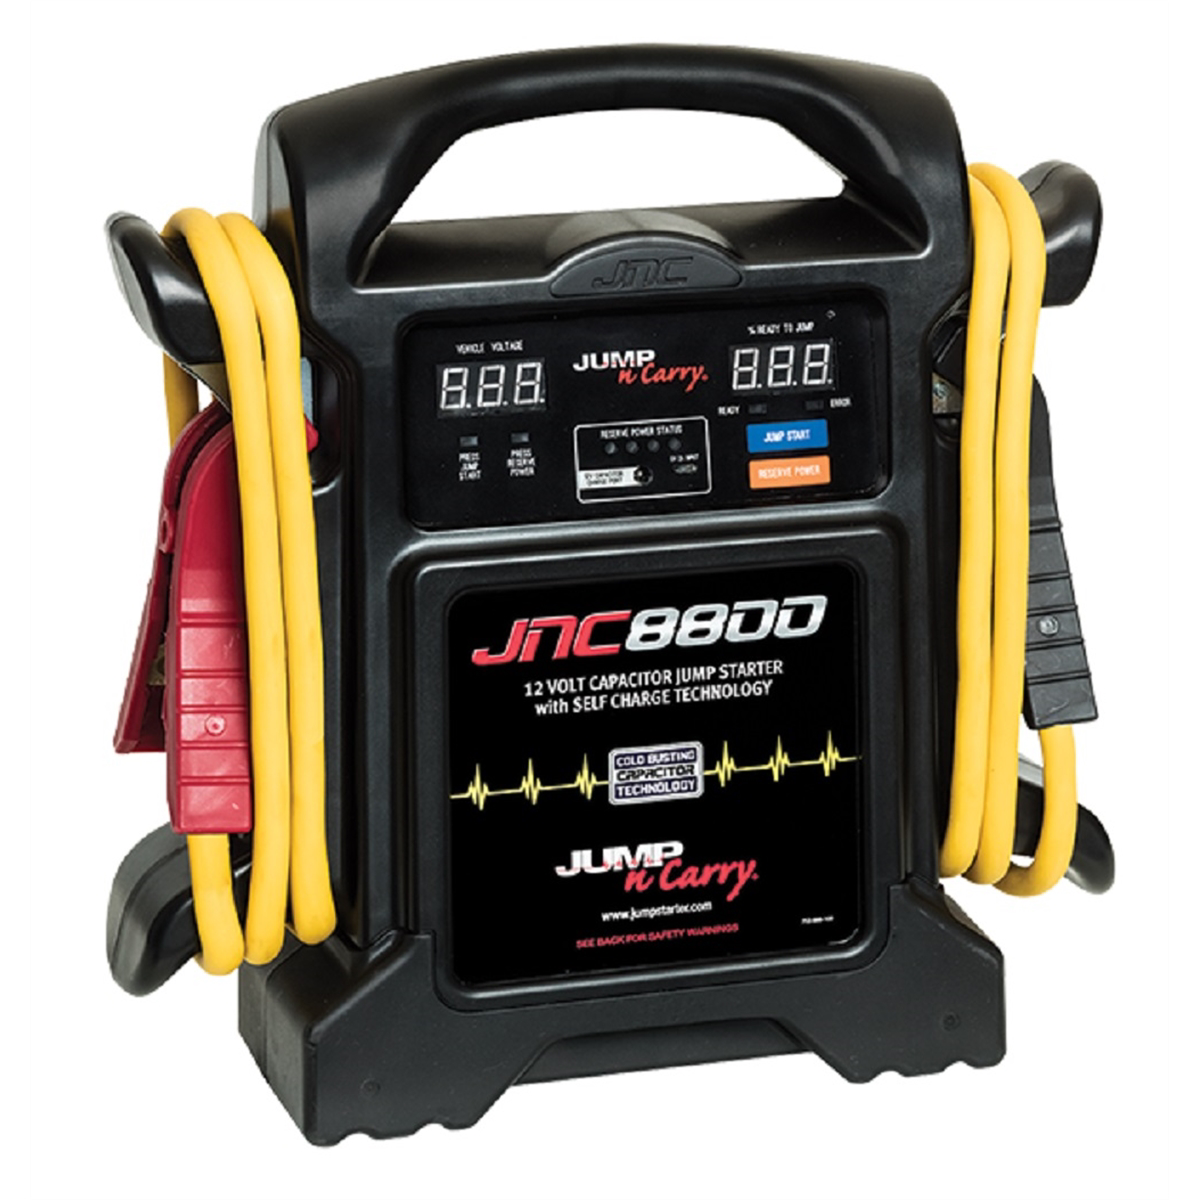 Clore Automotive Jump-N-Carry 800 Start Assist Amp 12V Capacitor Jump Starter - image 1 of 2